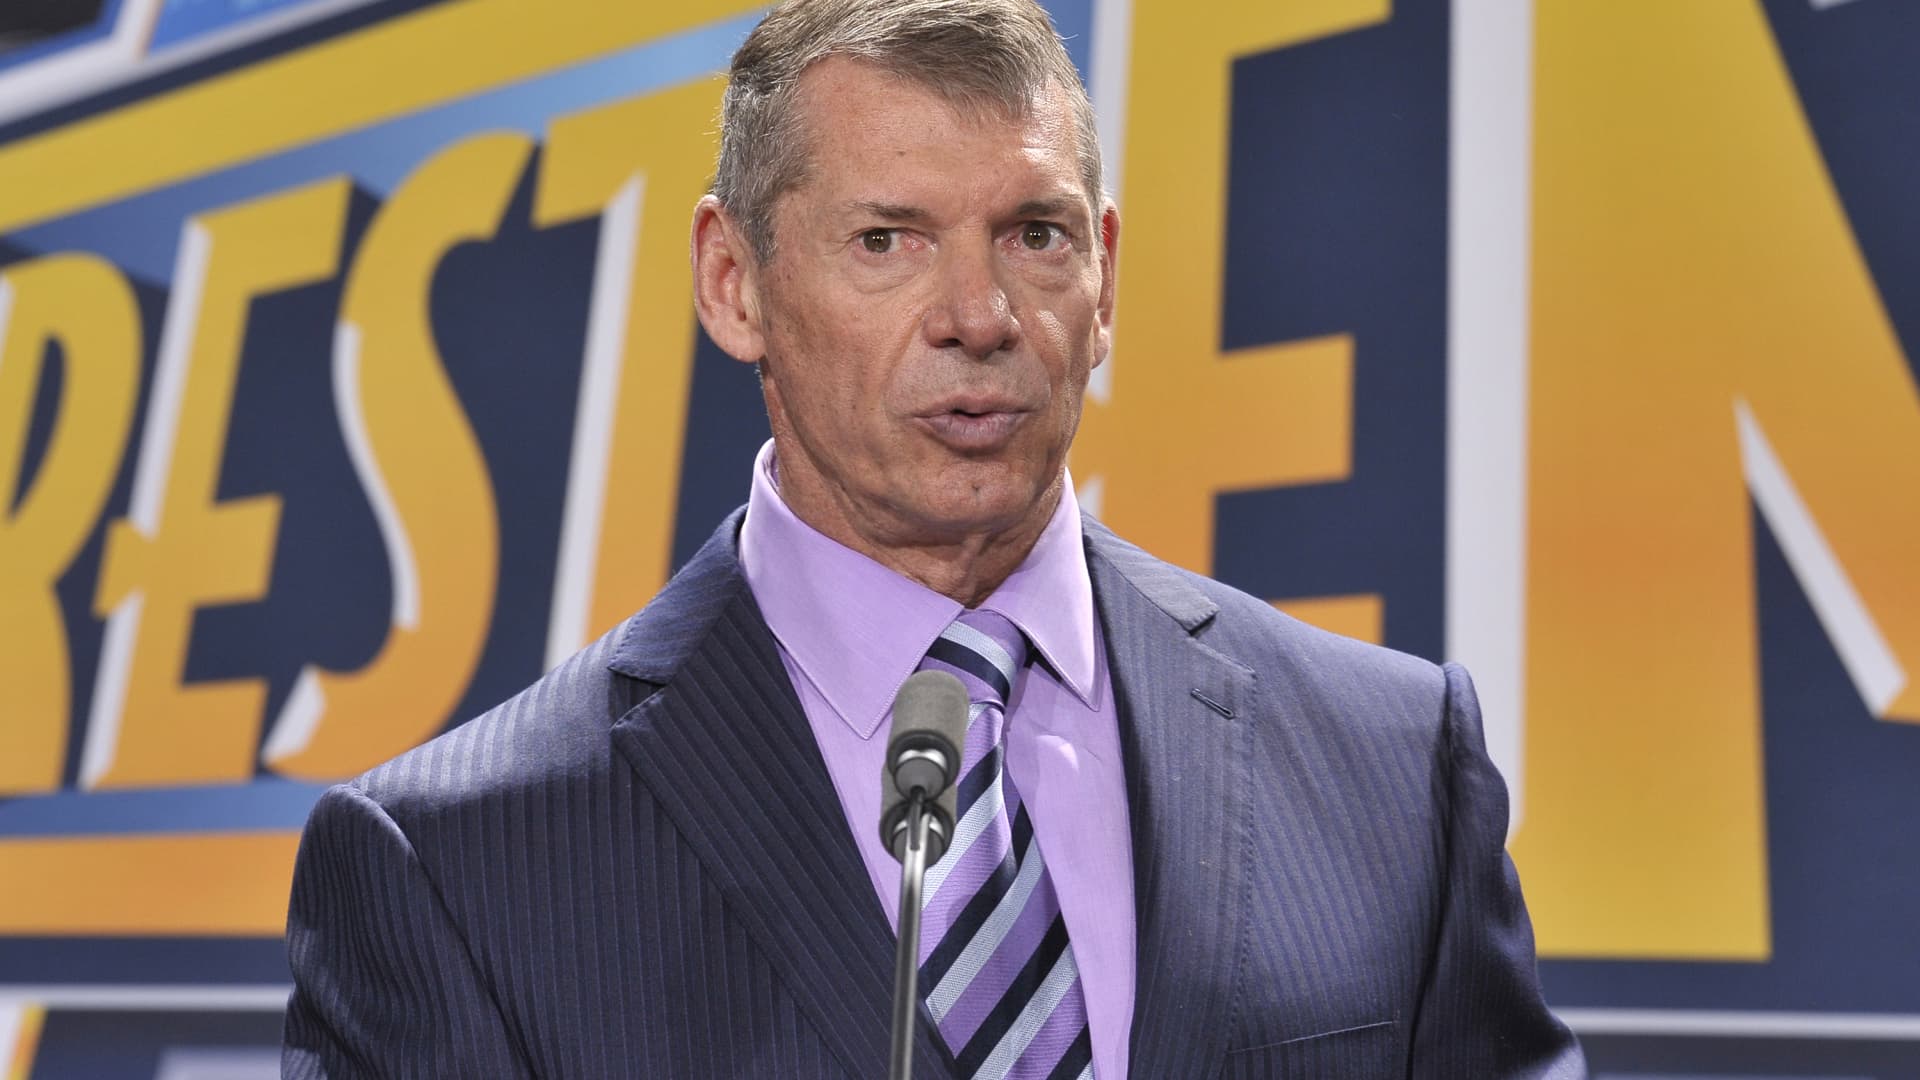 Vince McMahon retires as WWE chief amid probes into alleged misconduct of pro wrestling boss